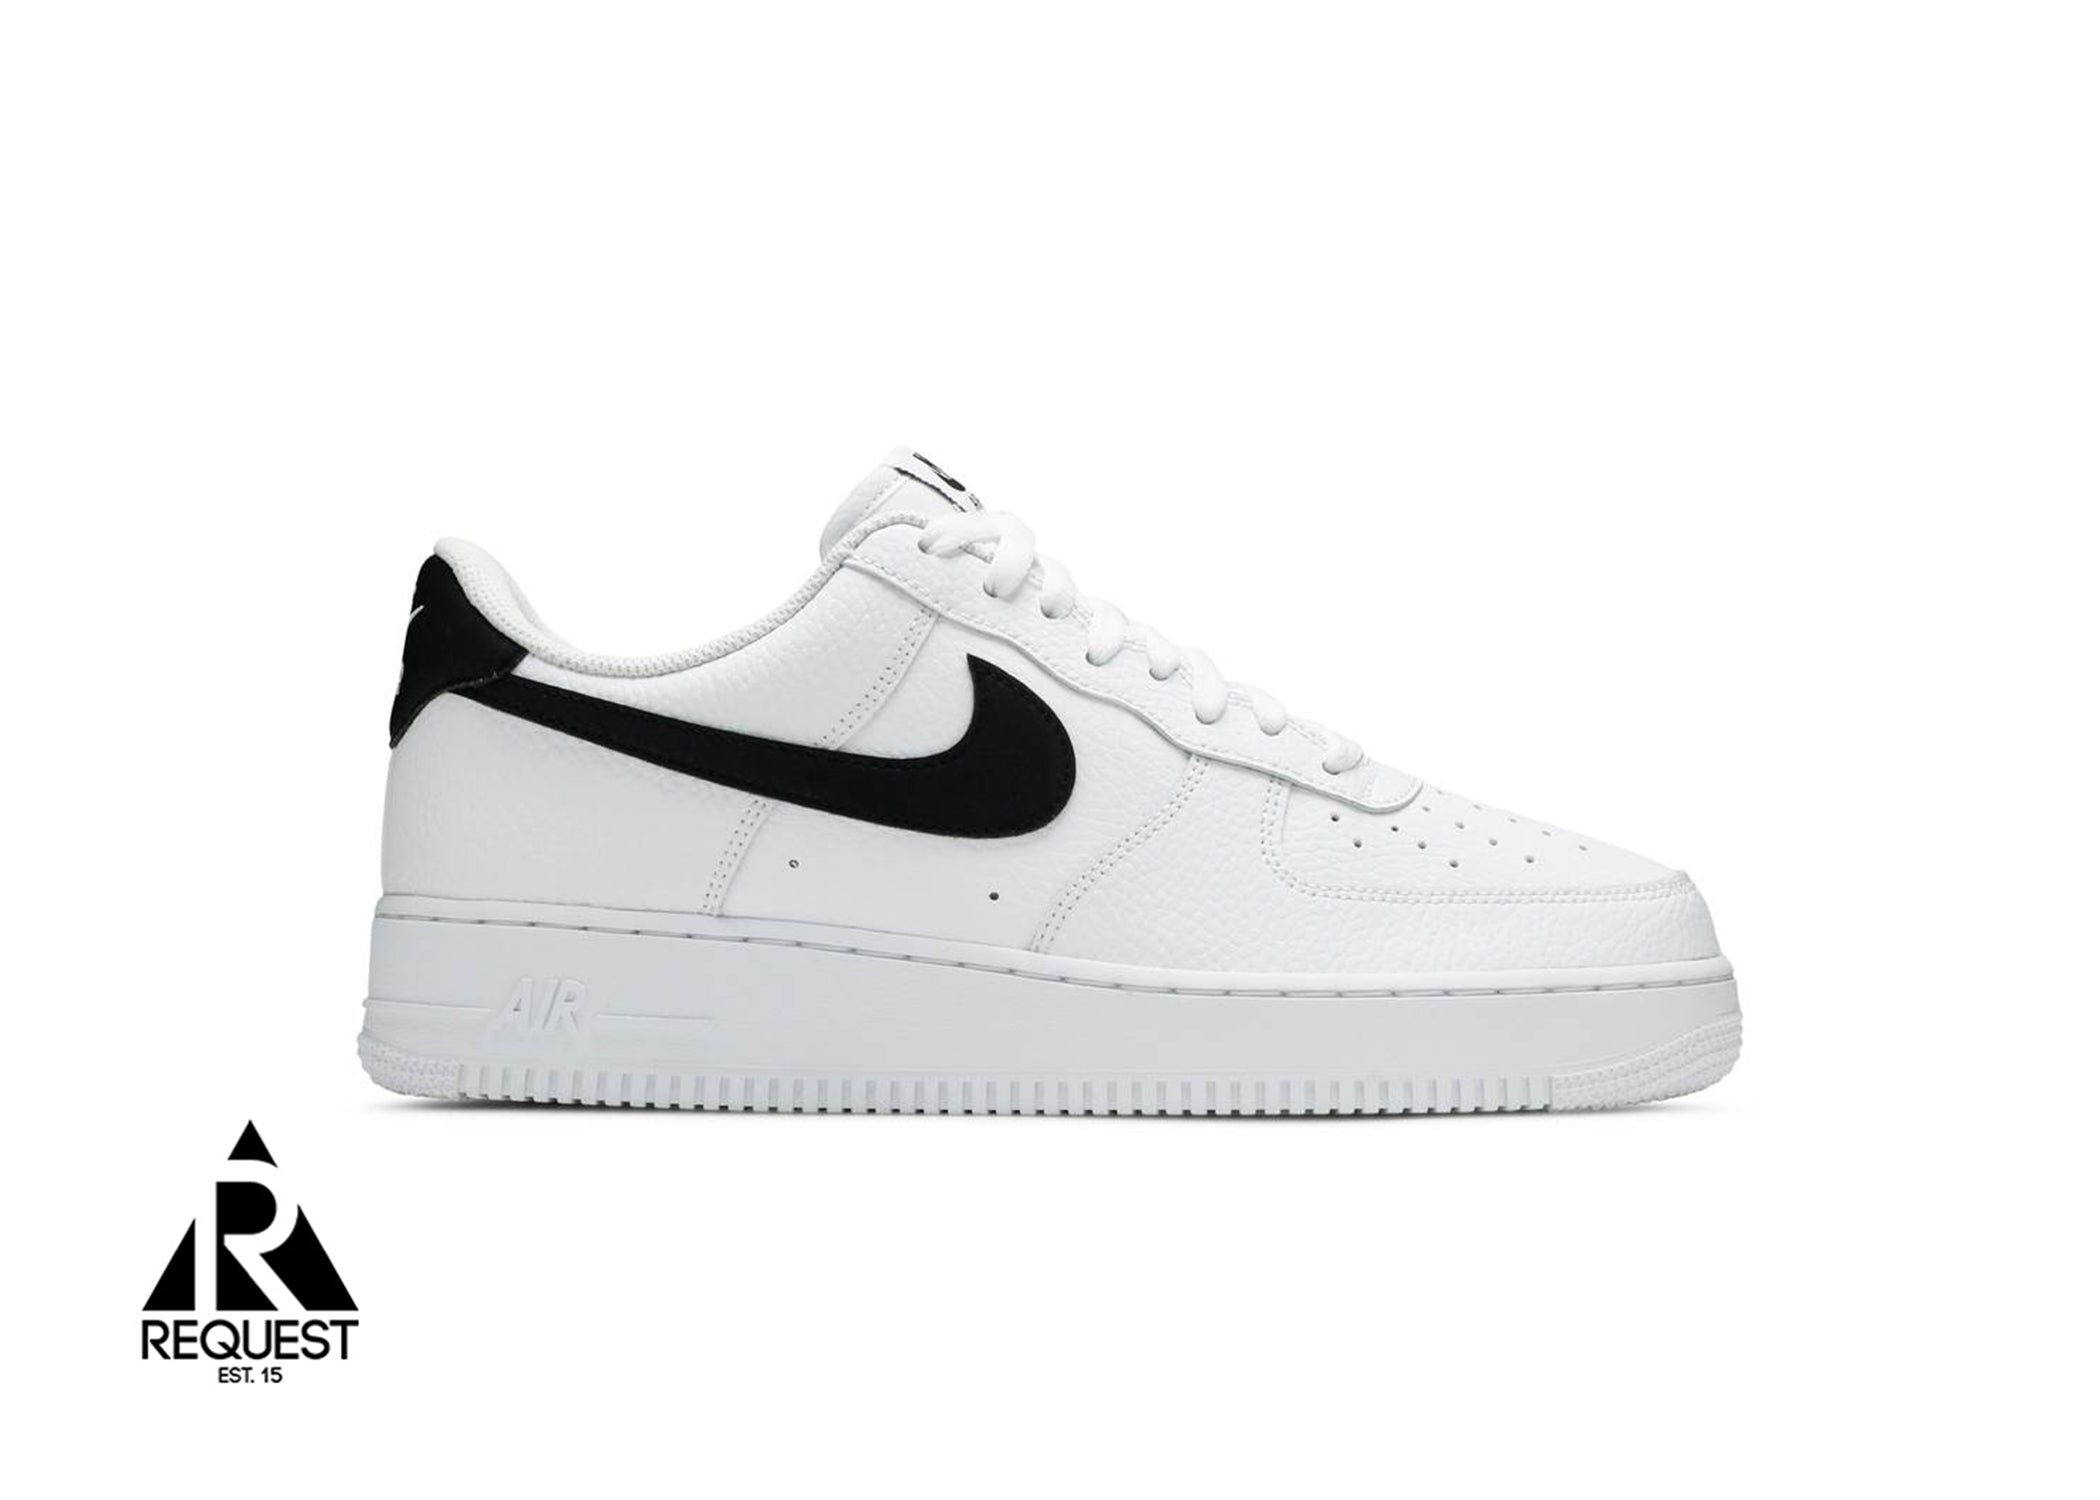 Nike Air Force 1 Low 07 “White Black Pebbled Leather”